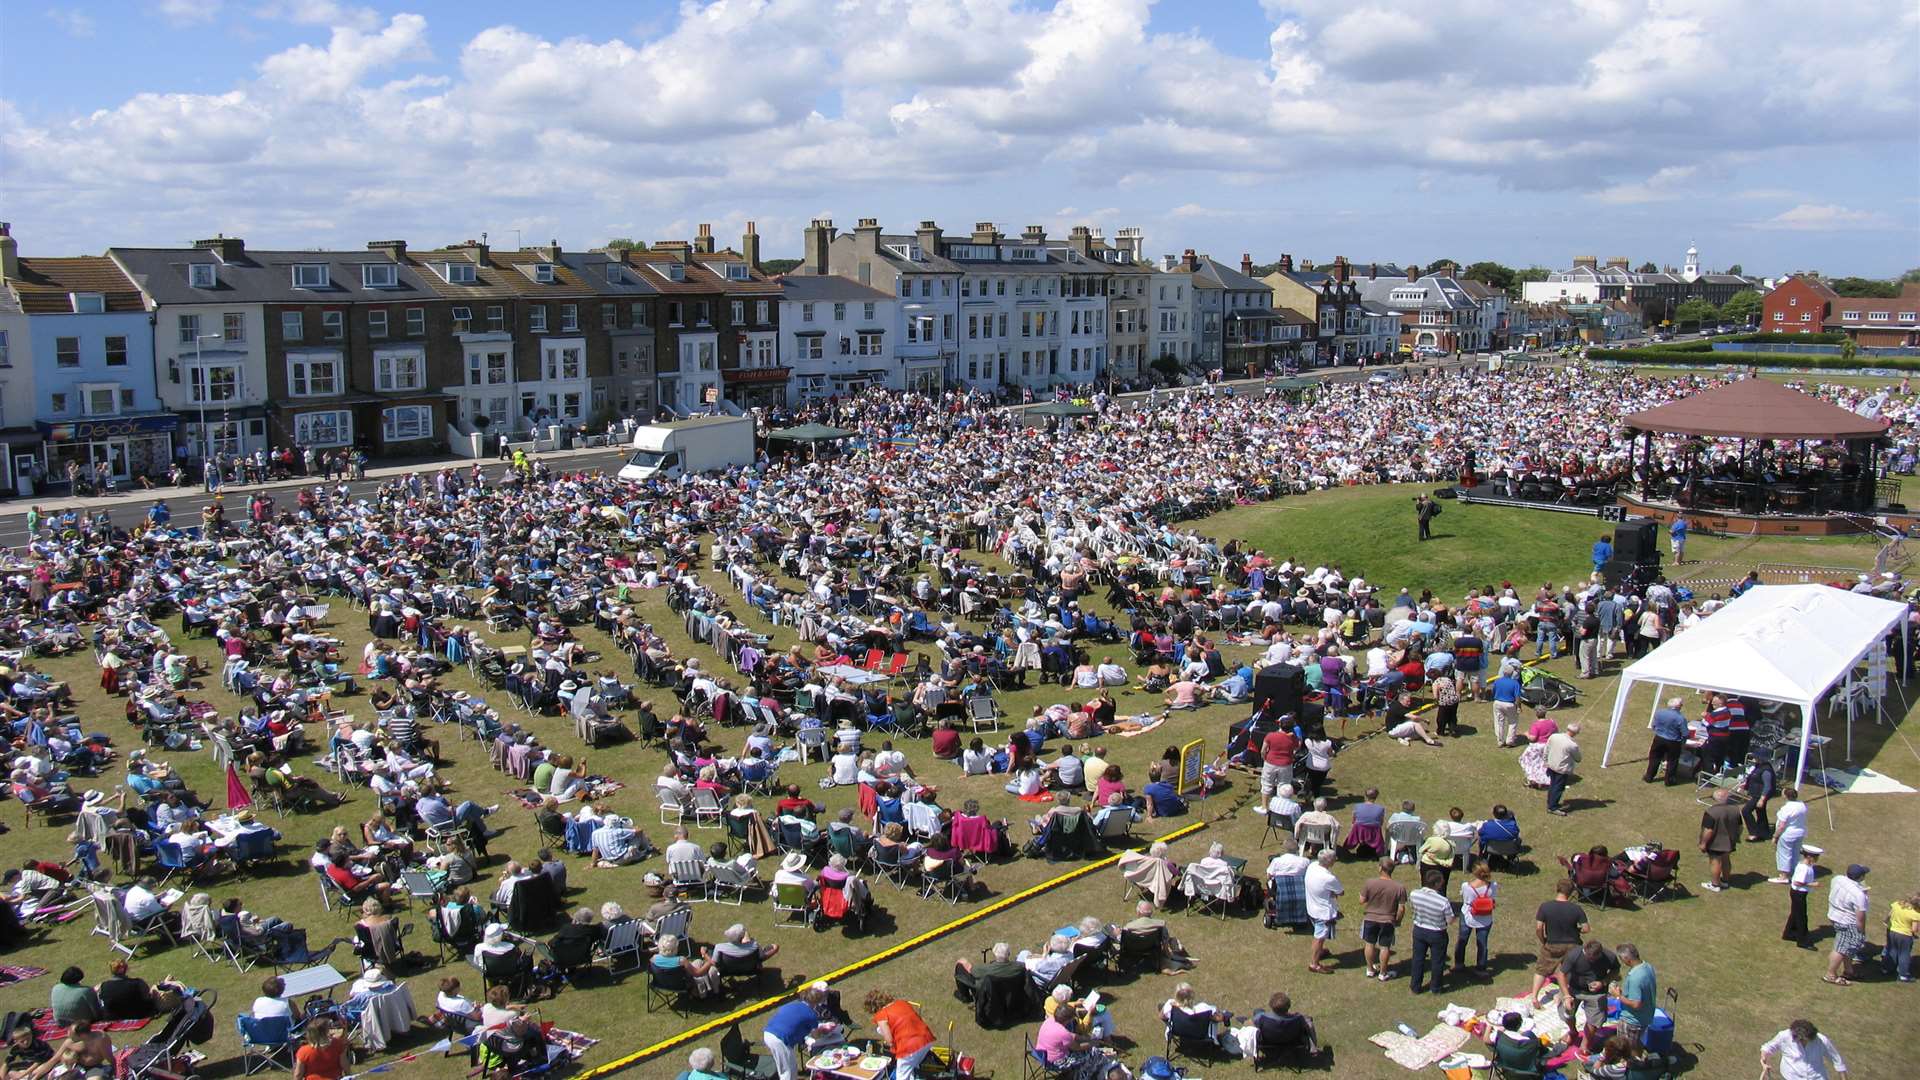 Huge crowd pack Walmer Green every year for the Royal Marines concert